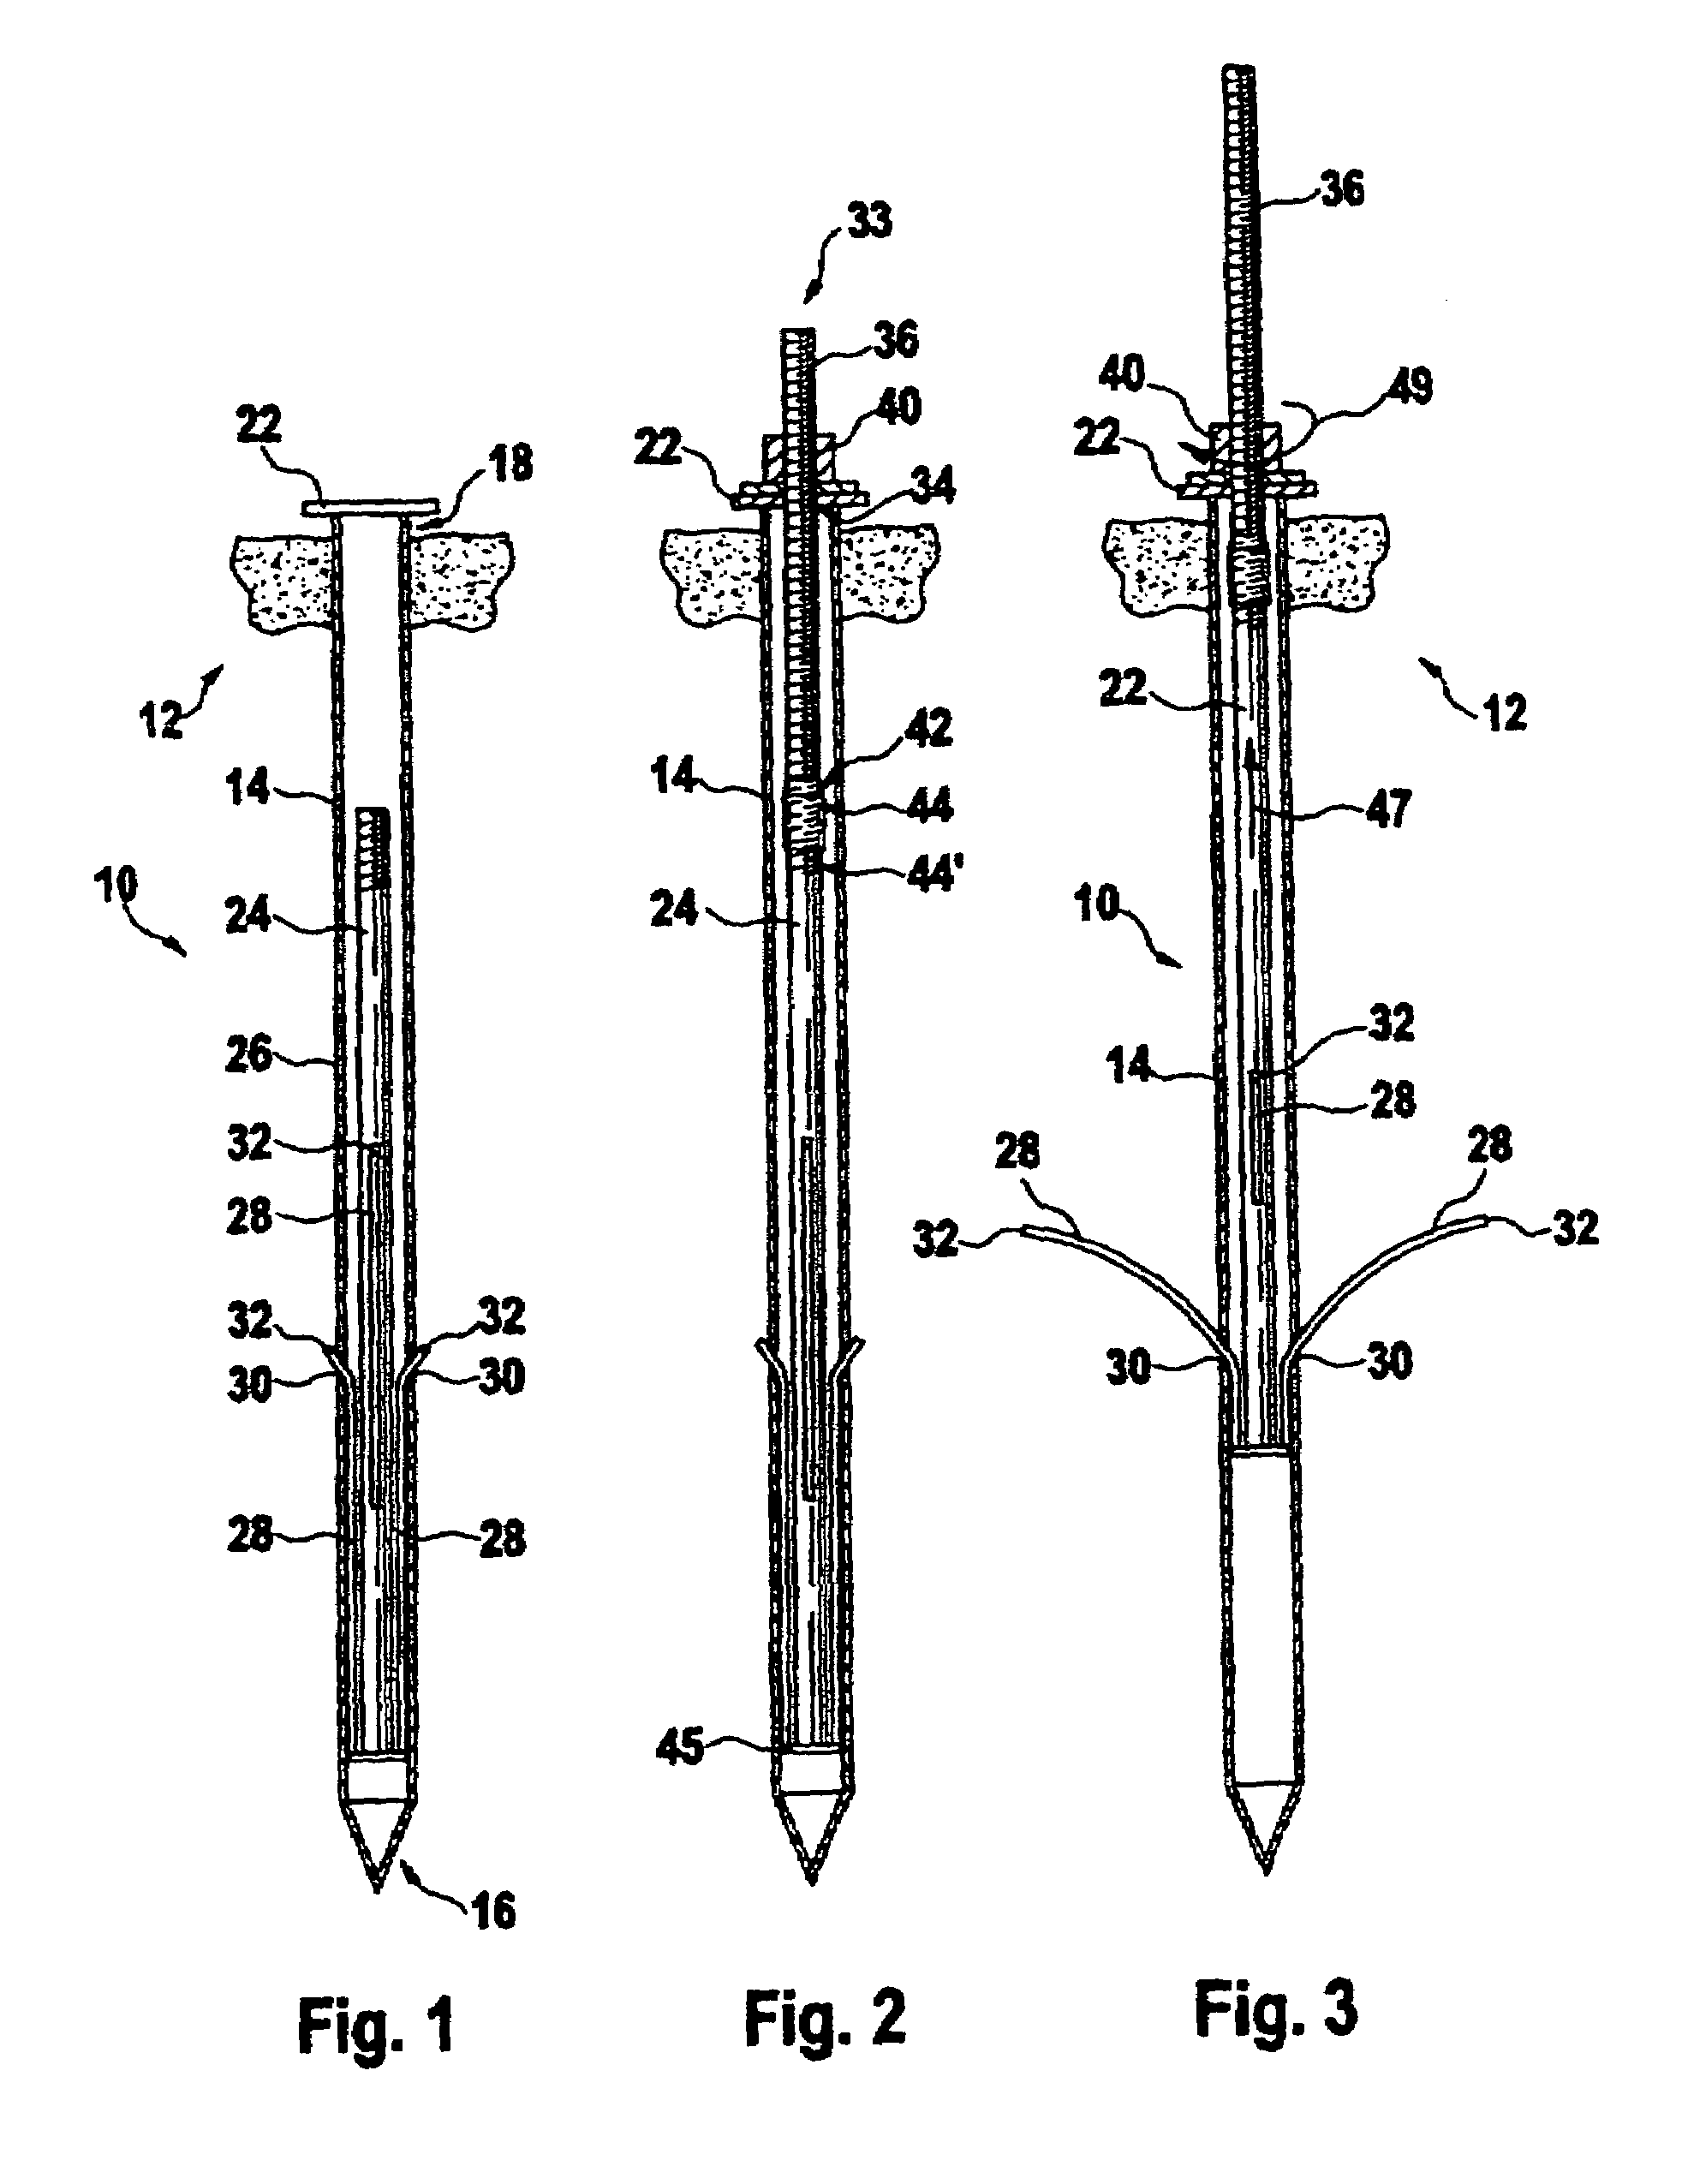 System for fixing an object in the ground by means of a peg